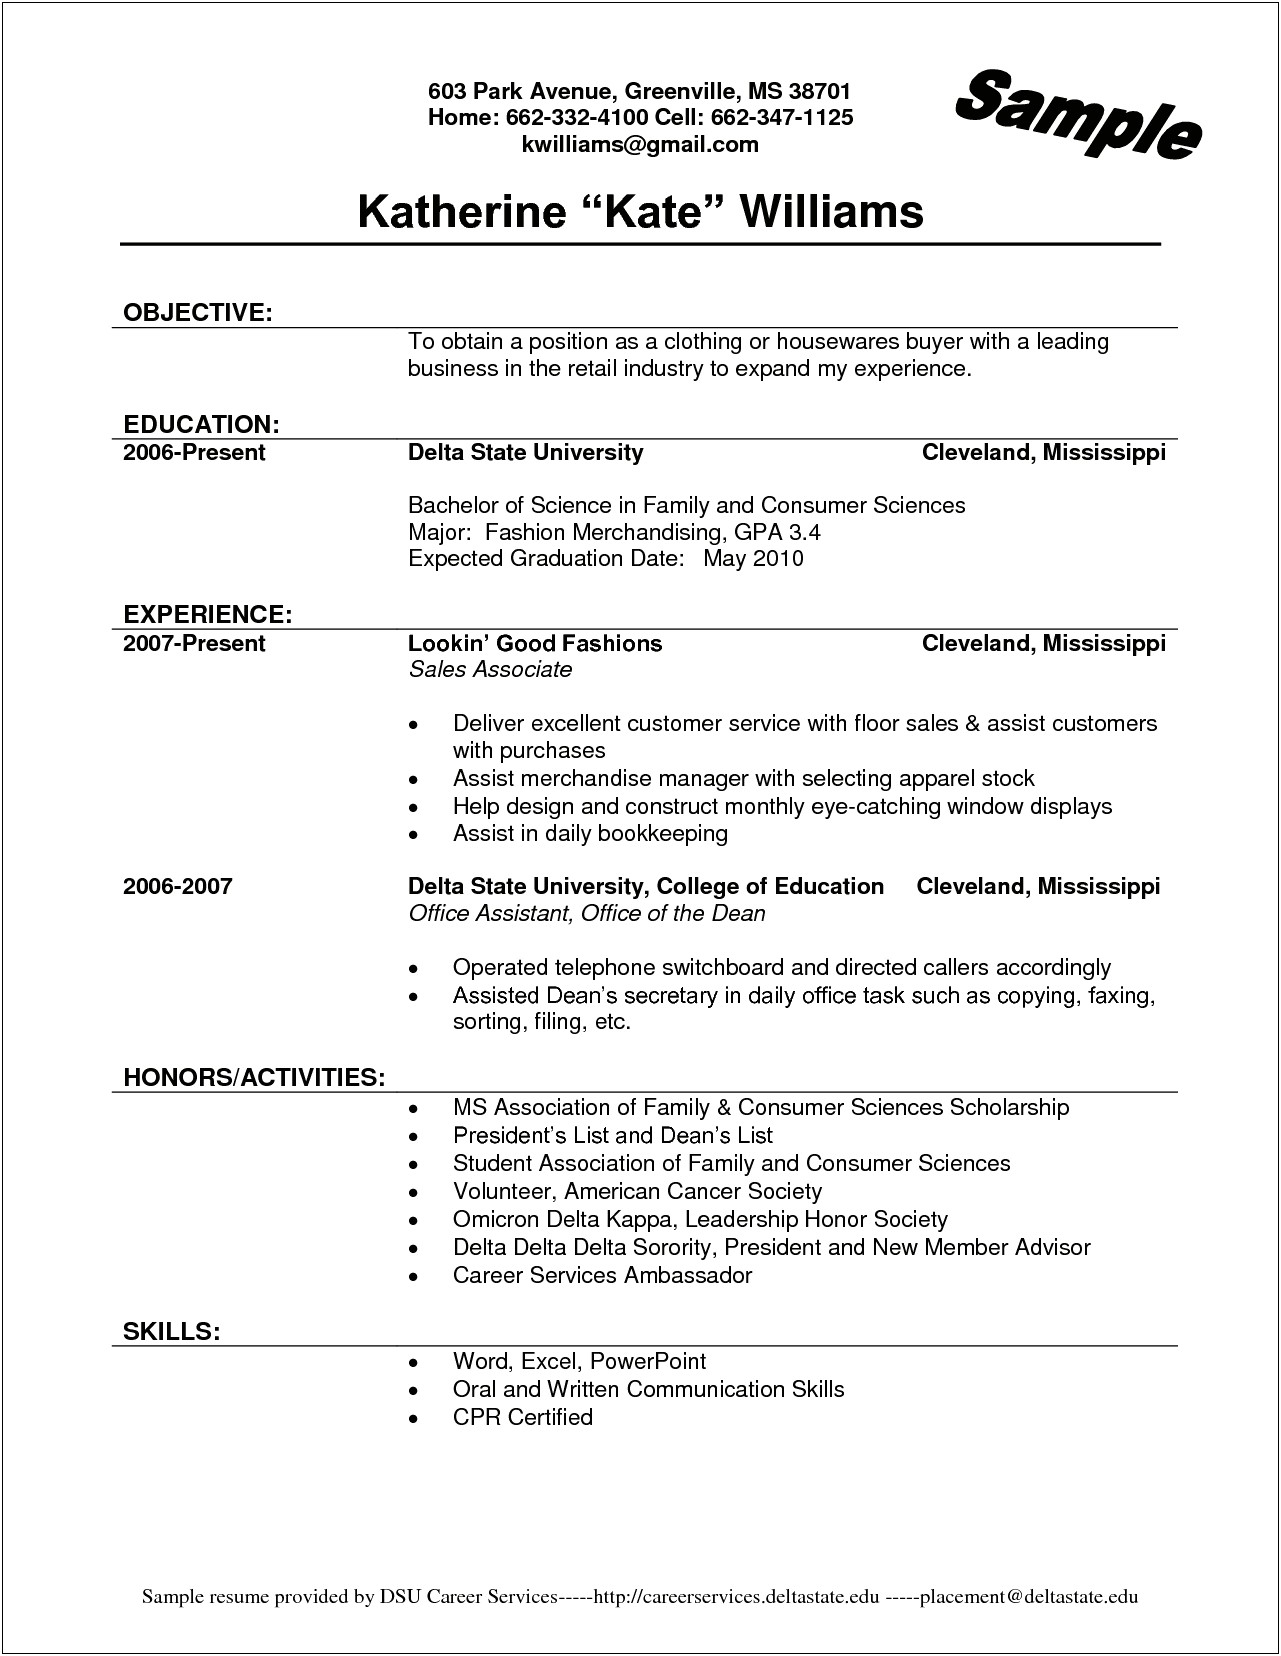 Objective For Working In Retaili Resume